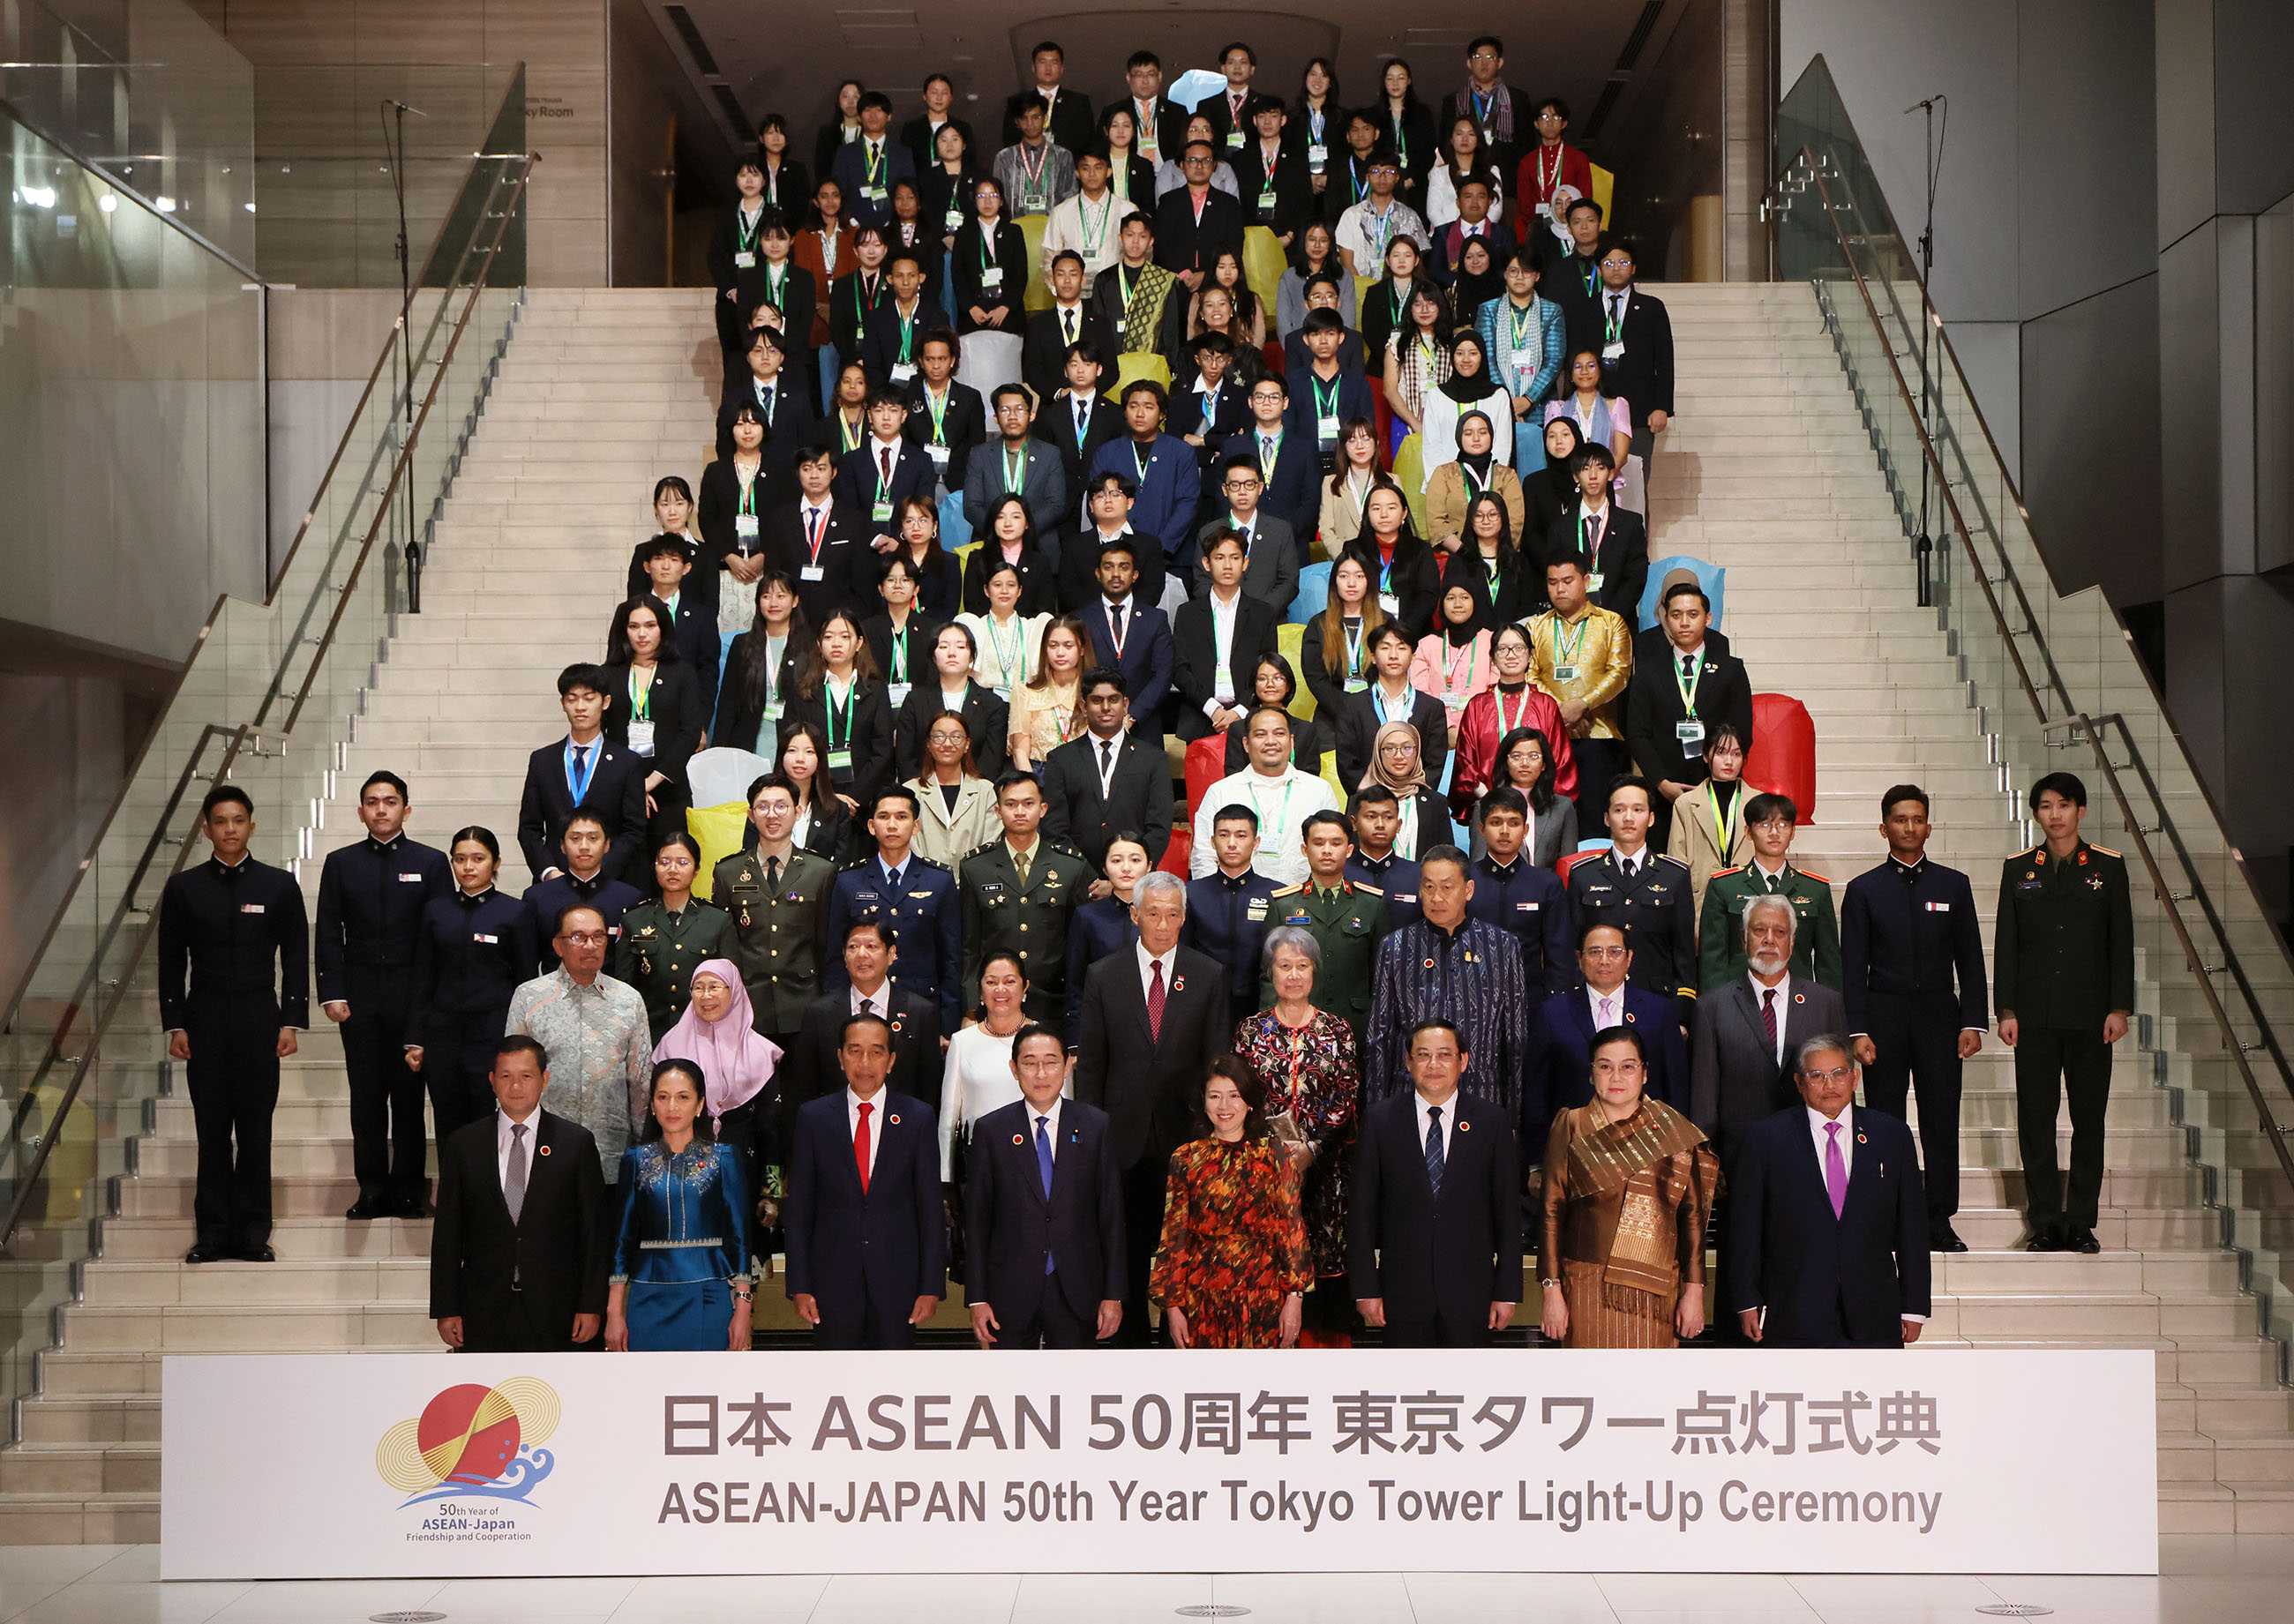 The Commemorative Ceremony for the 50th Year of ASEAN-Japan Friendship and Cooperation